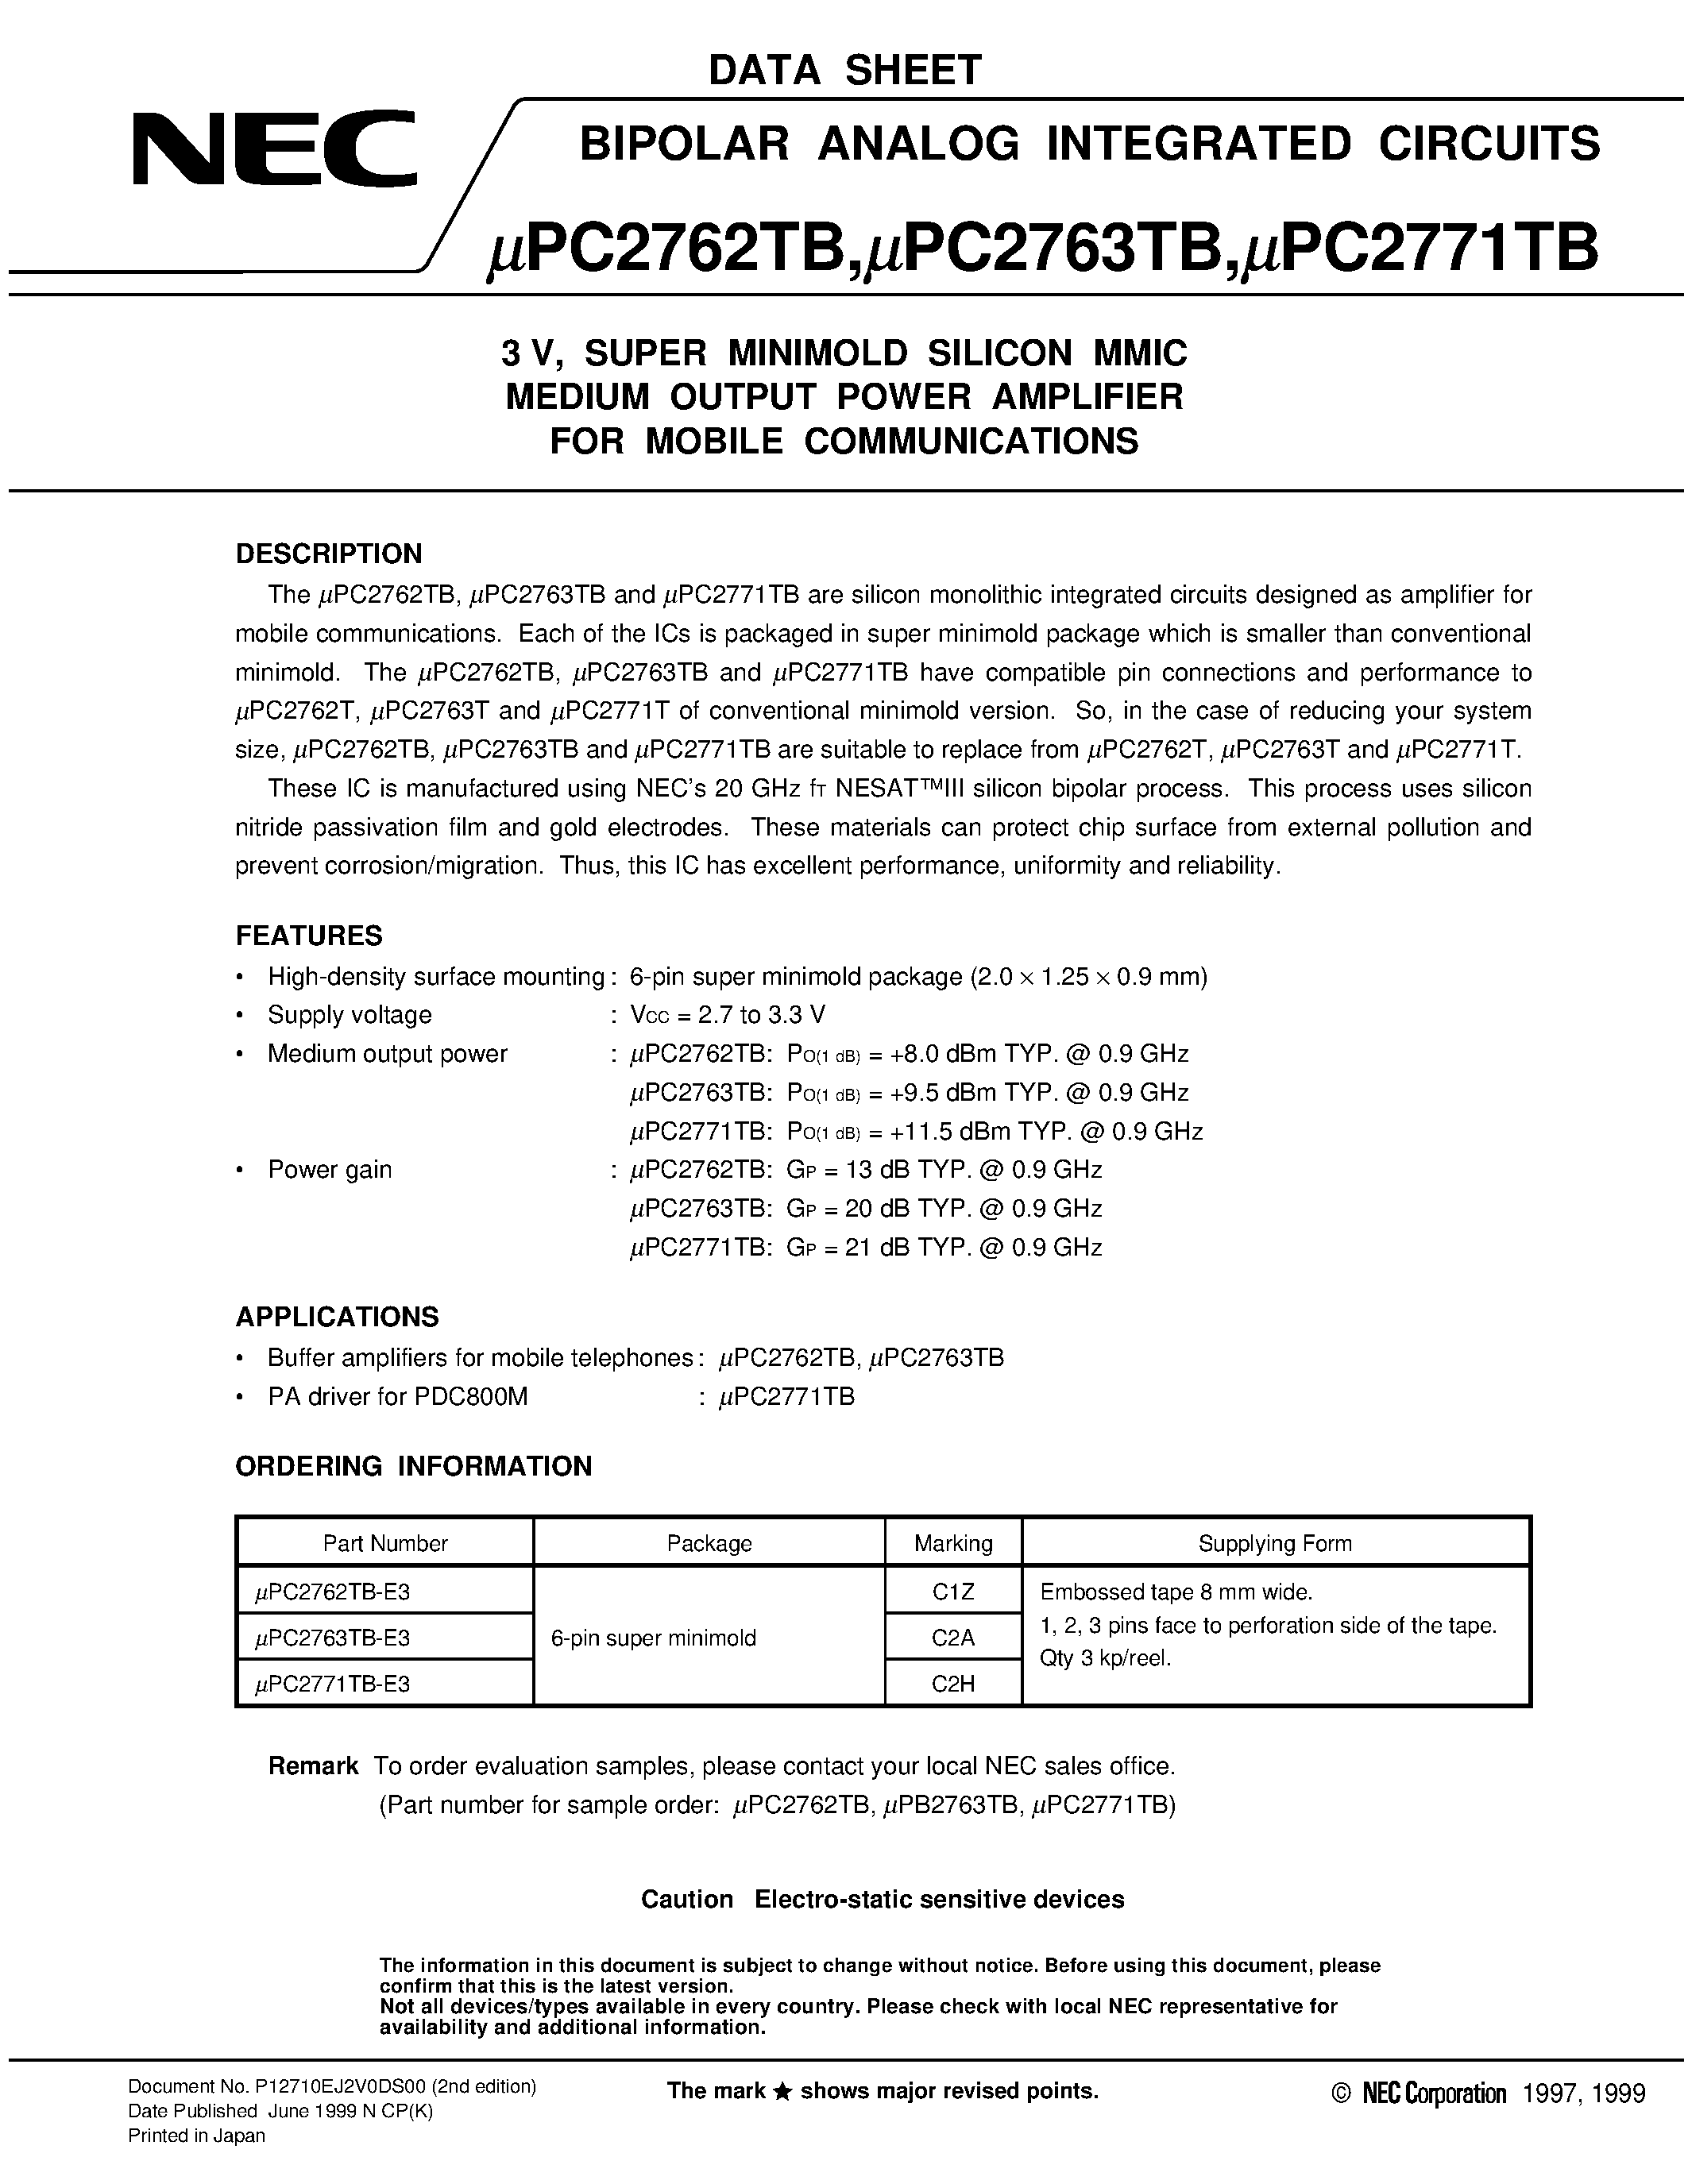 Datasheet UPC2763TB - 3 V/ 2.9 GHz SILICON MMIC MEDIUM OUTPUT POWER AMPLIFIER FOR MOBILE COMMUNICATIONS page 1